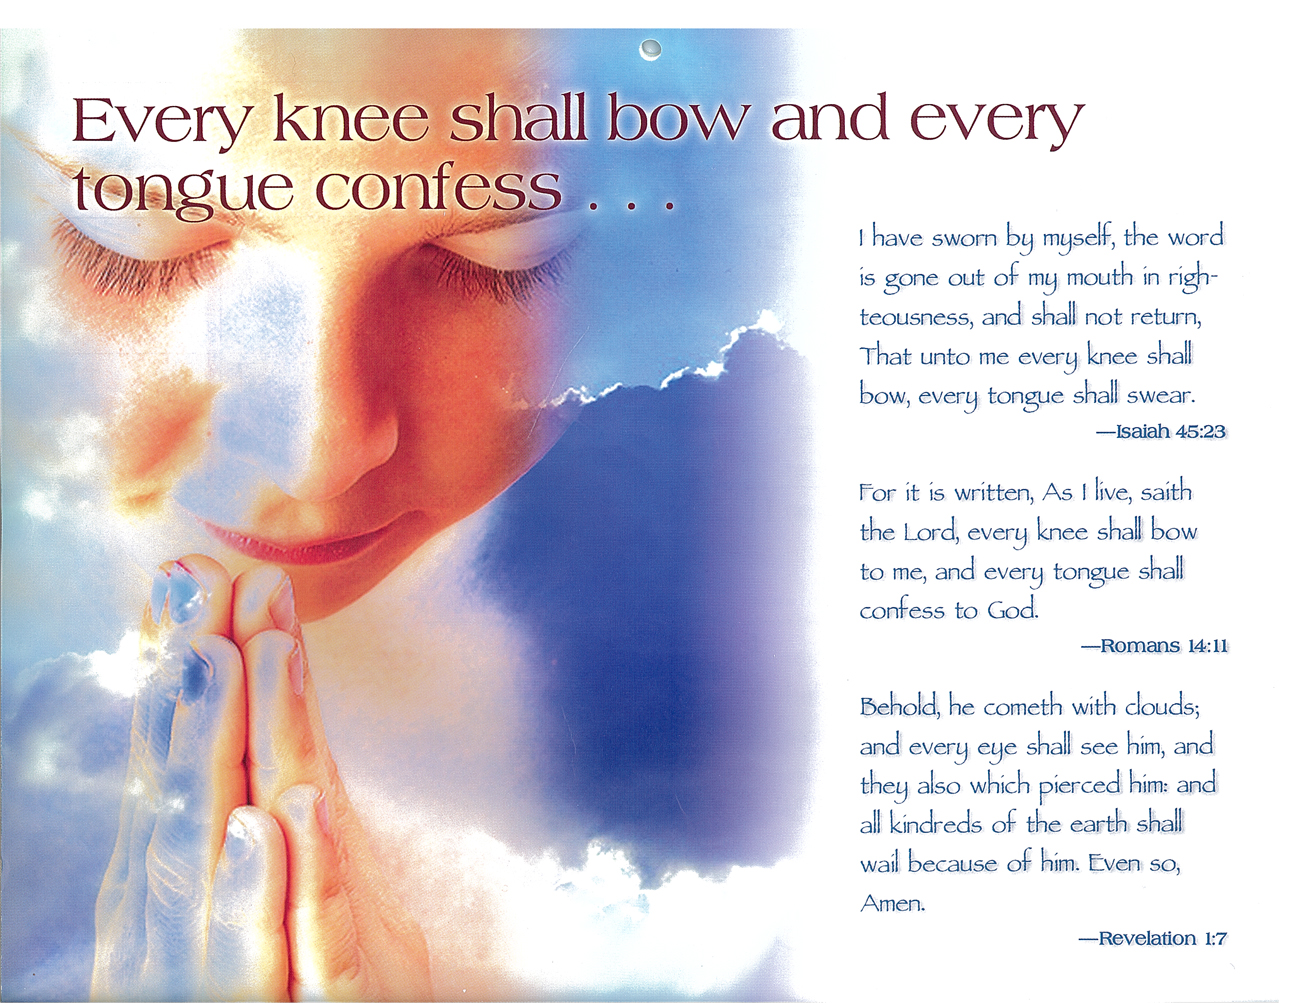 2010 Prophecy Calendar: December - Every knee shall bow and every tongue confess...